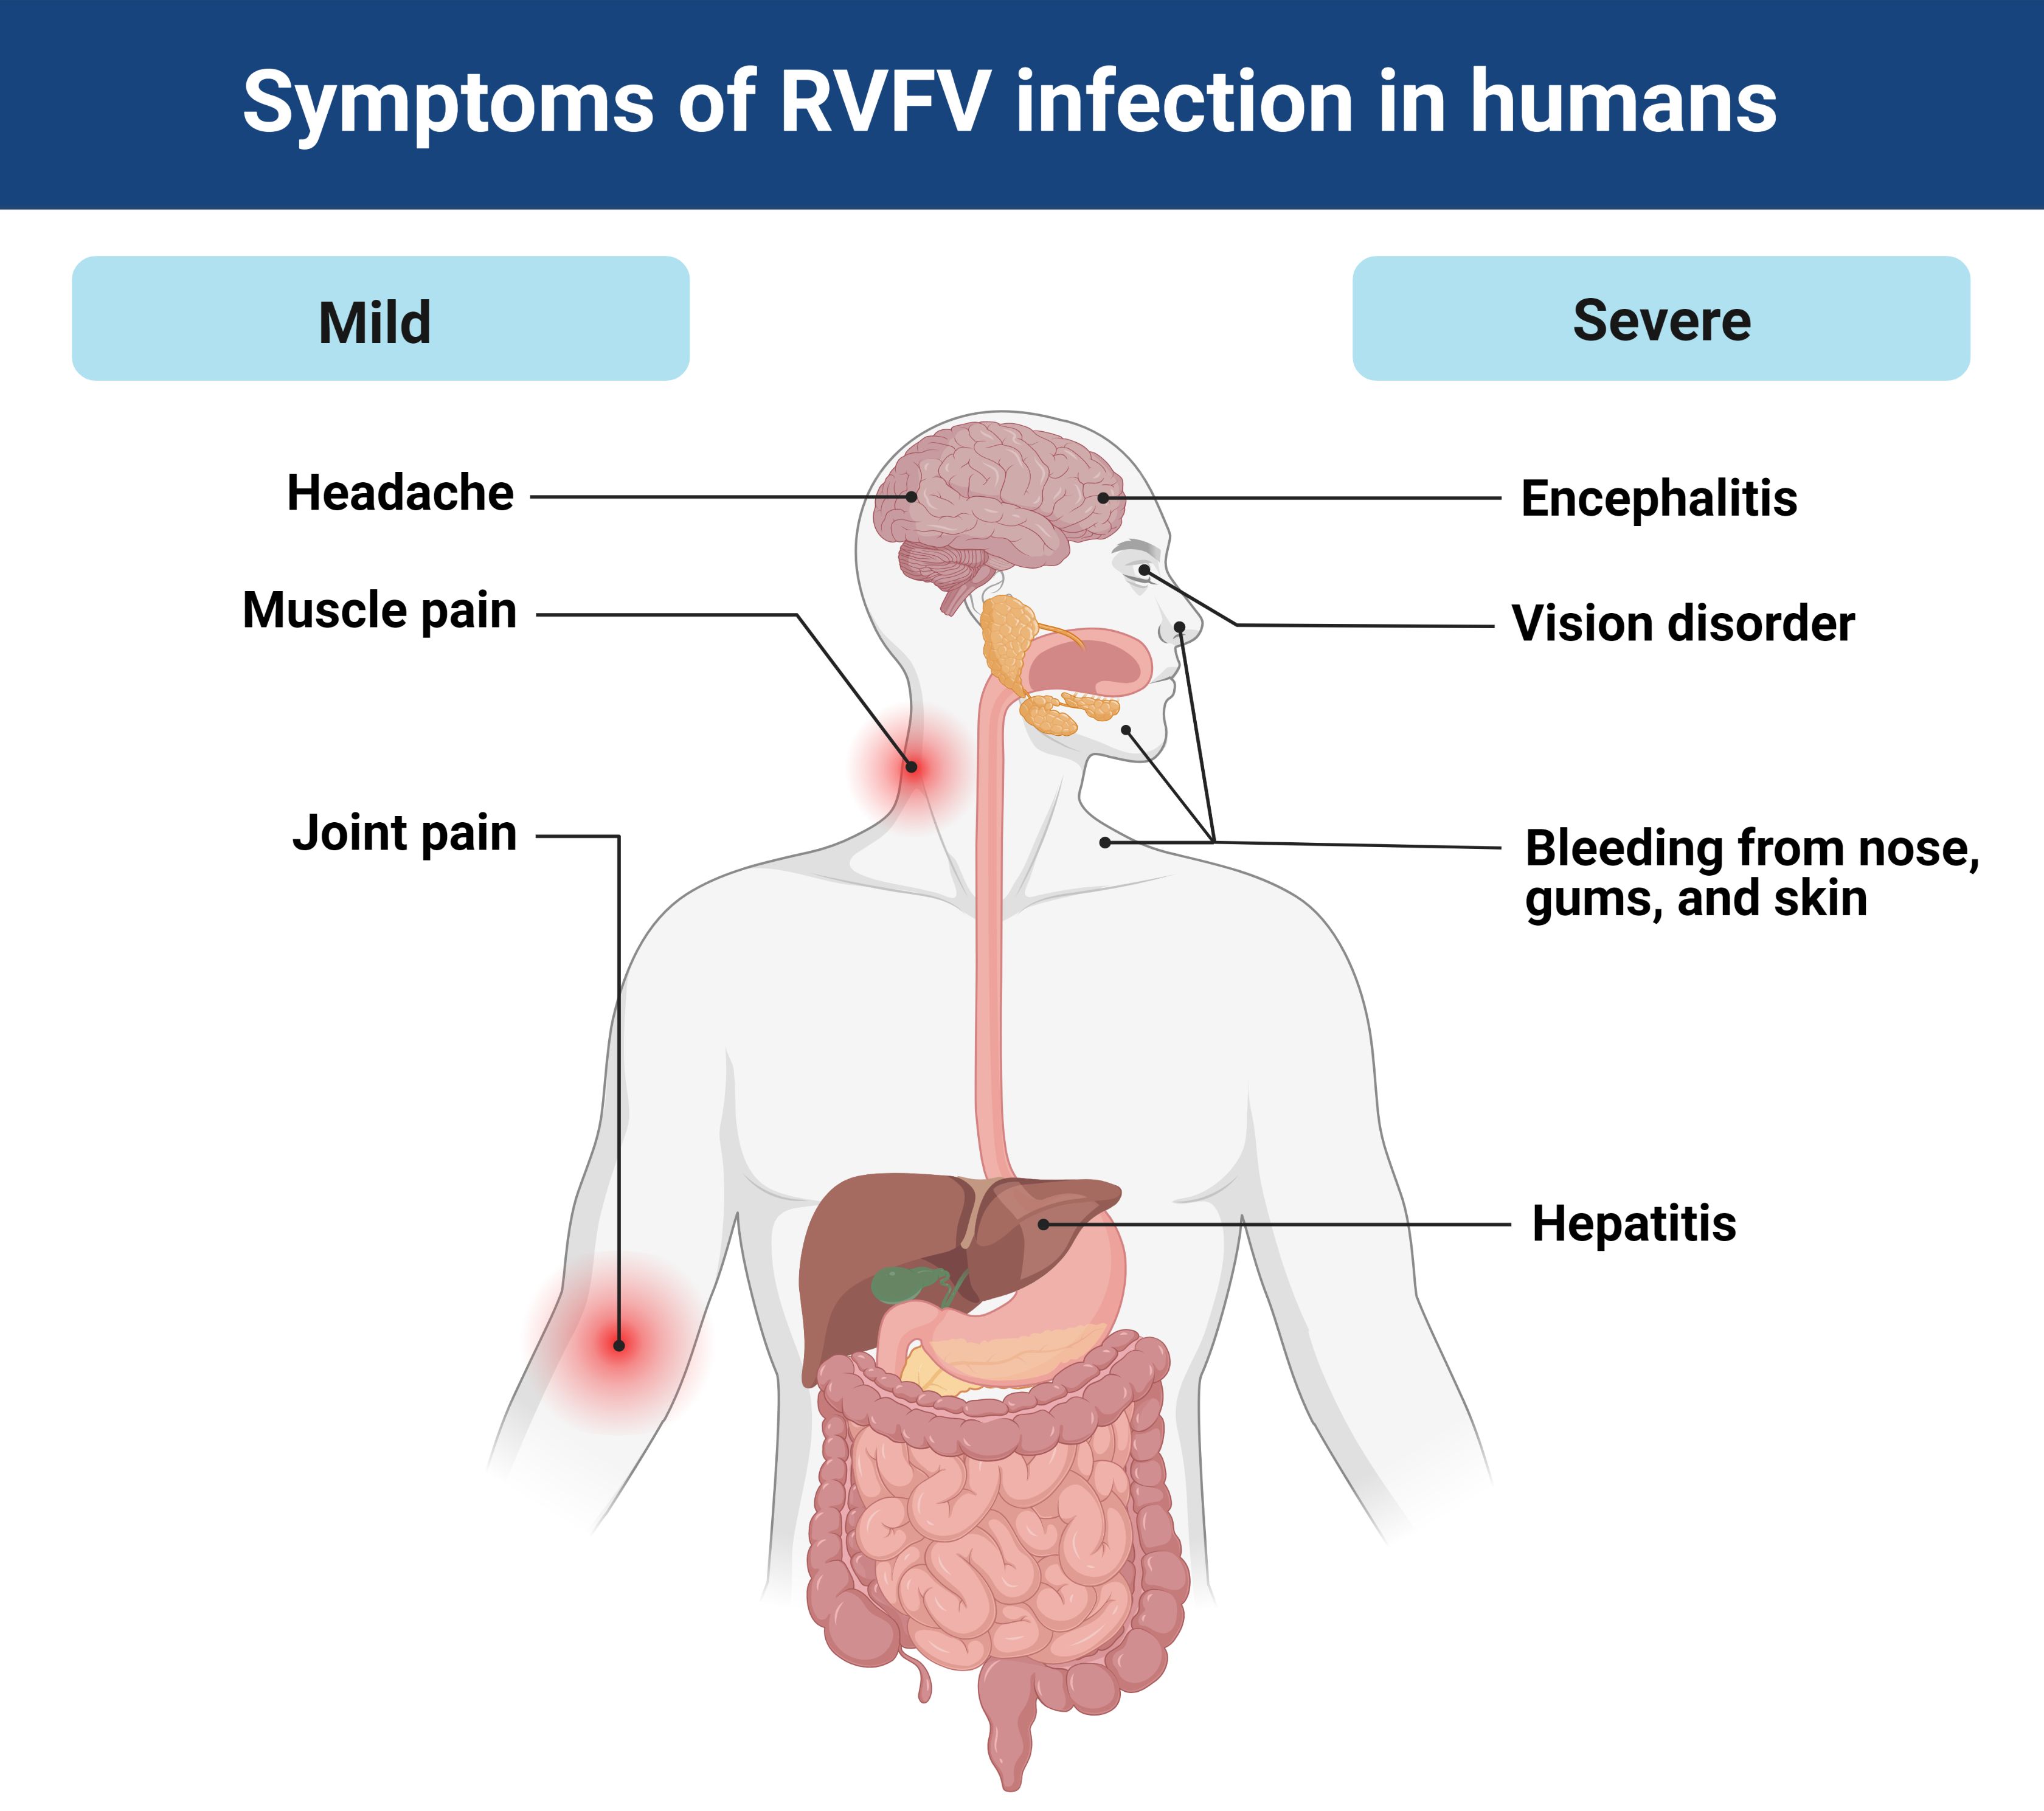 RVFV infection manifestations in humans. 